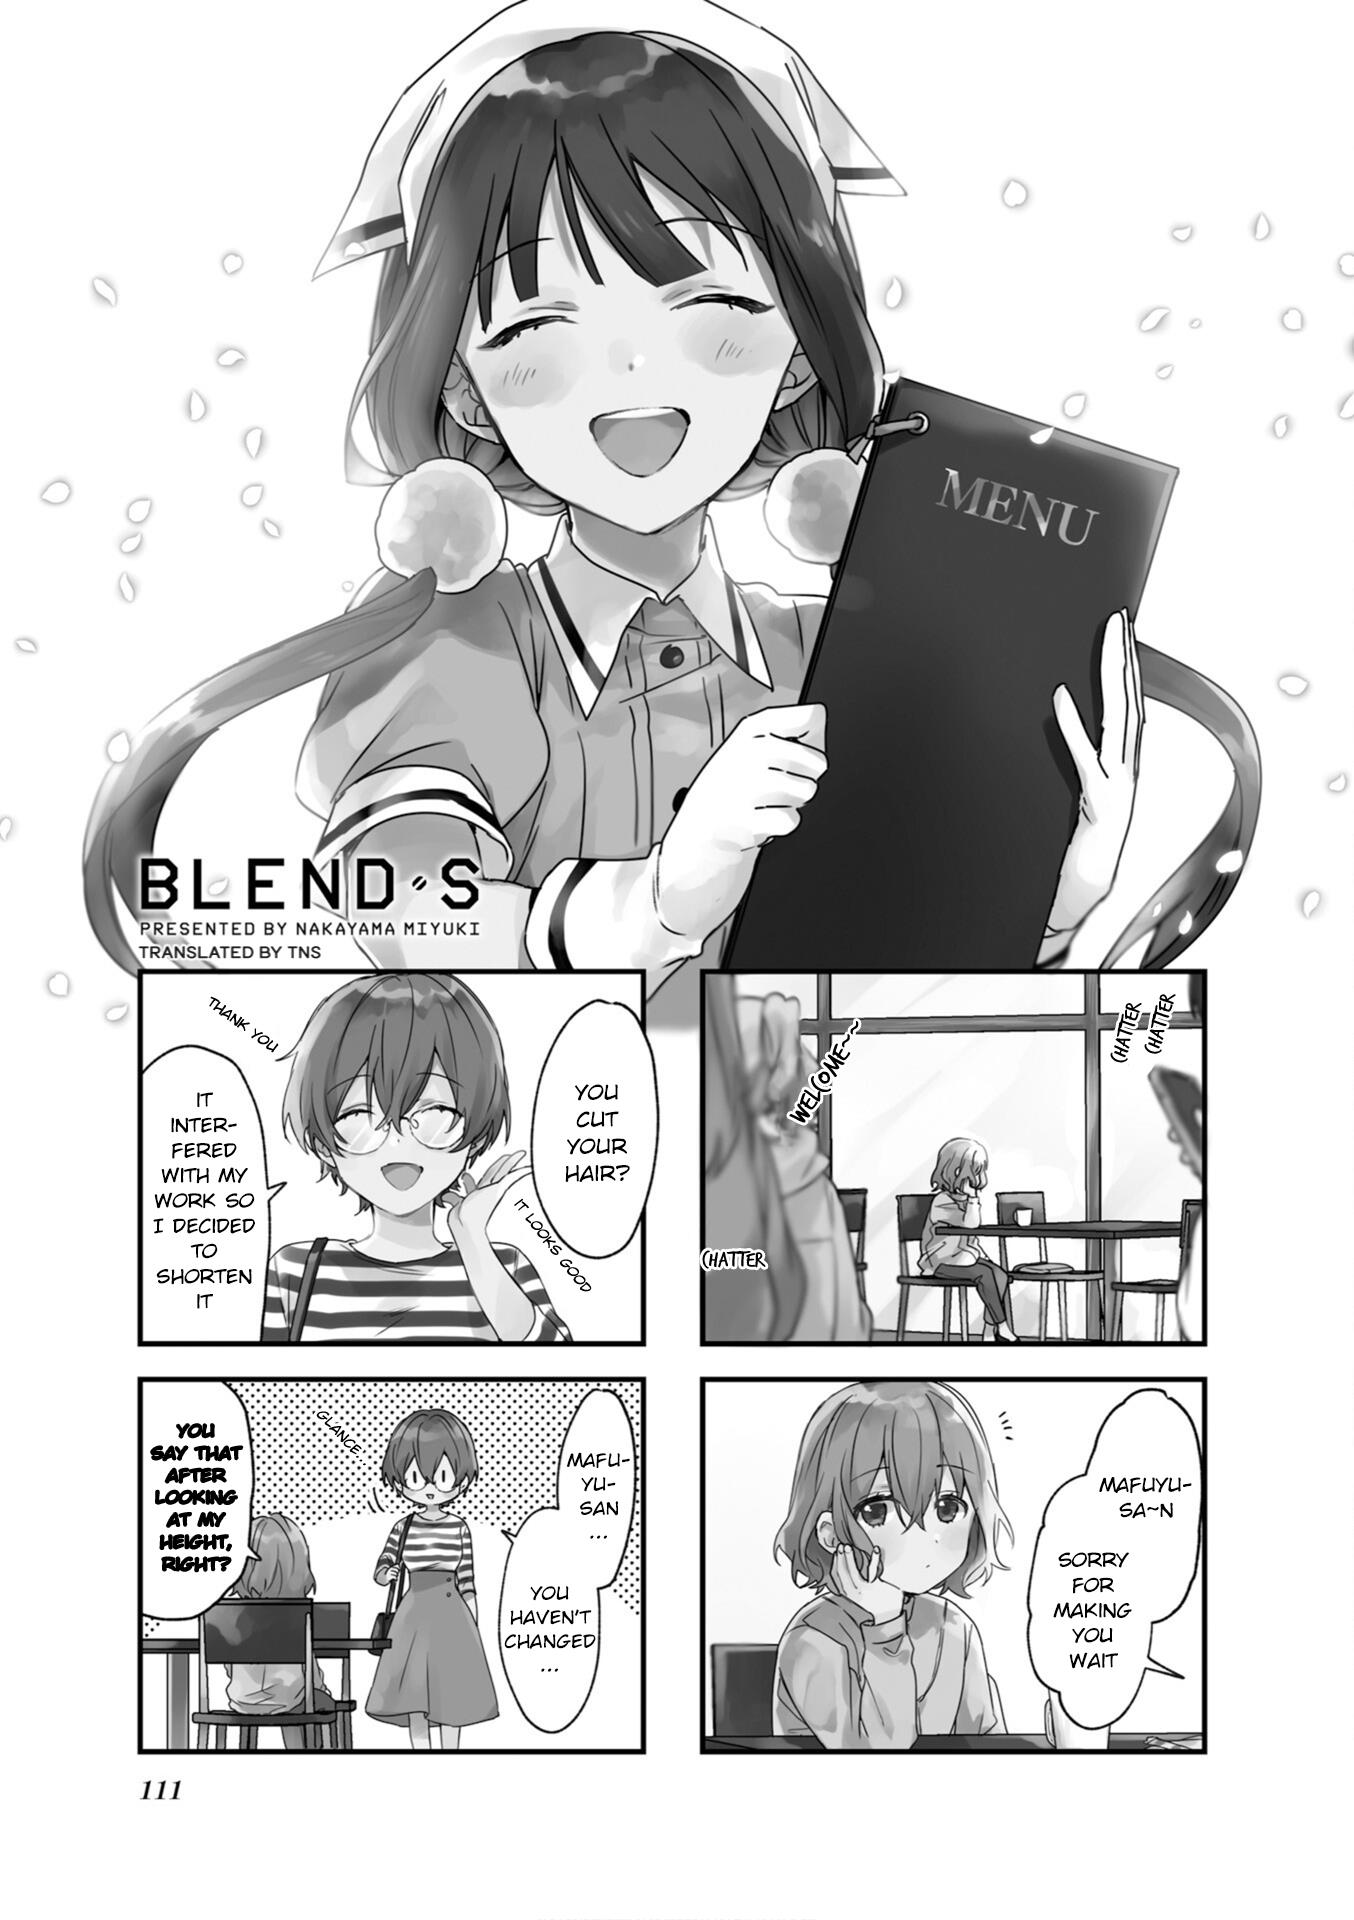 Blend-S Vol.8 Chapter 113 - Picture 1